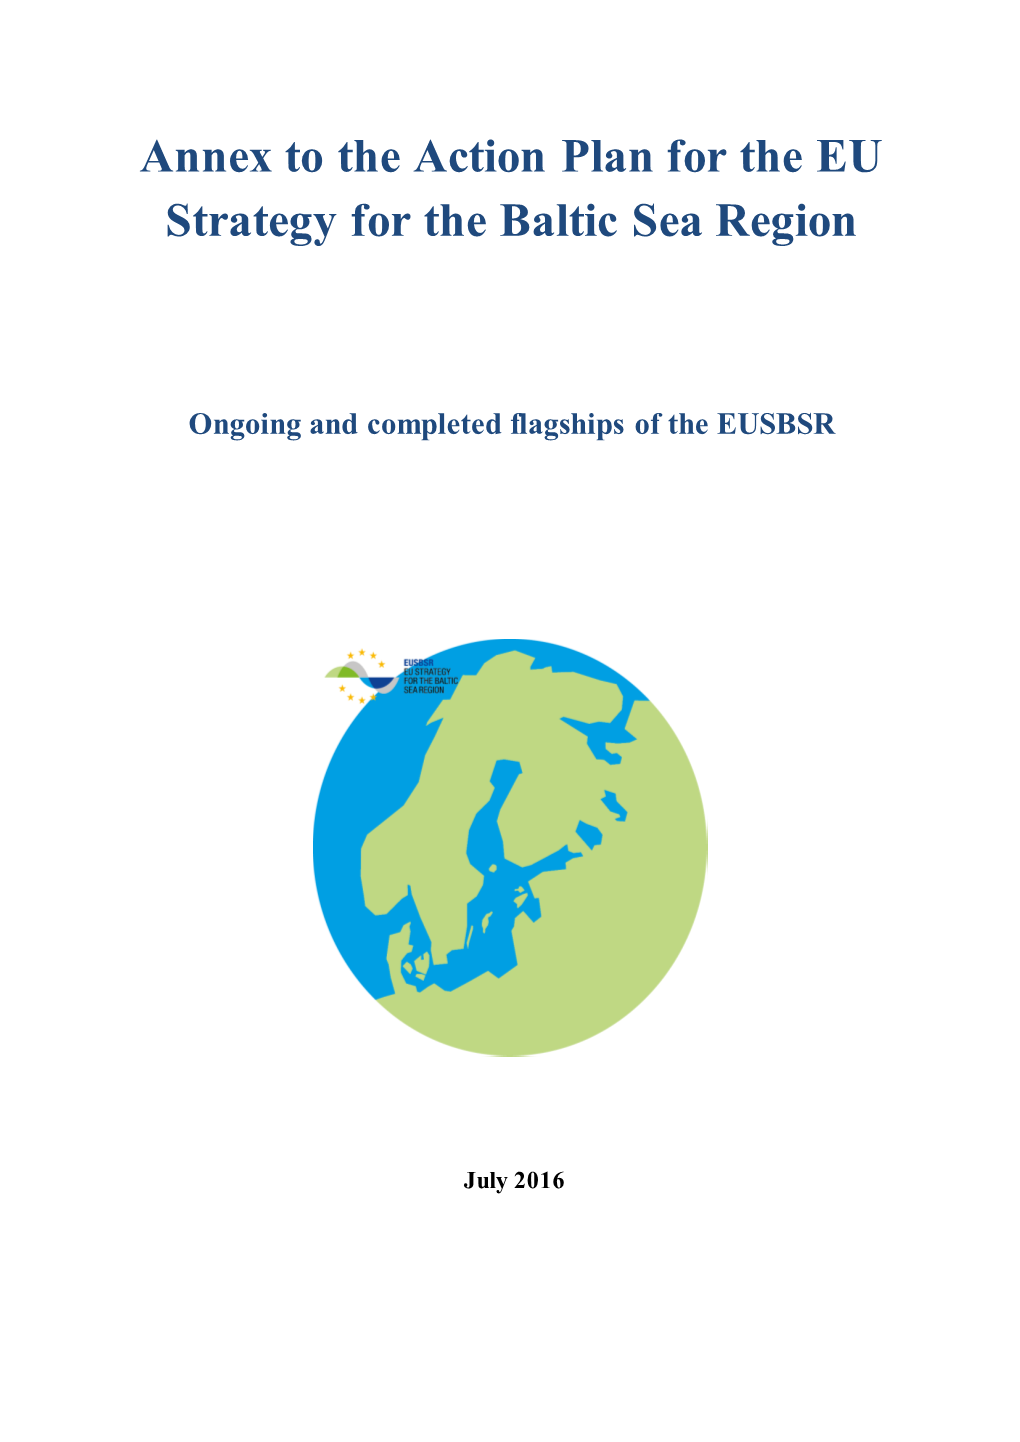 Annex to the Action Plan for the EU Strategy for the Baltic Sea Region